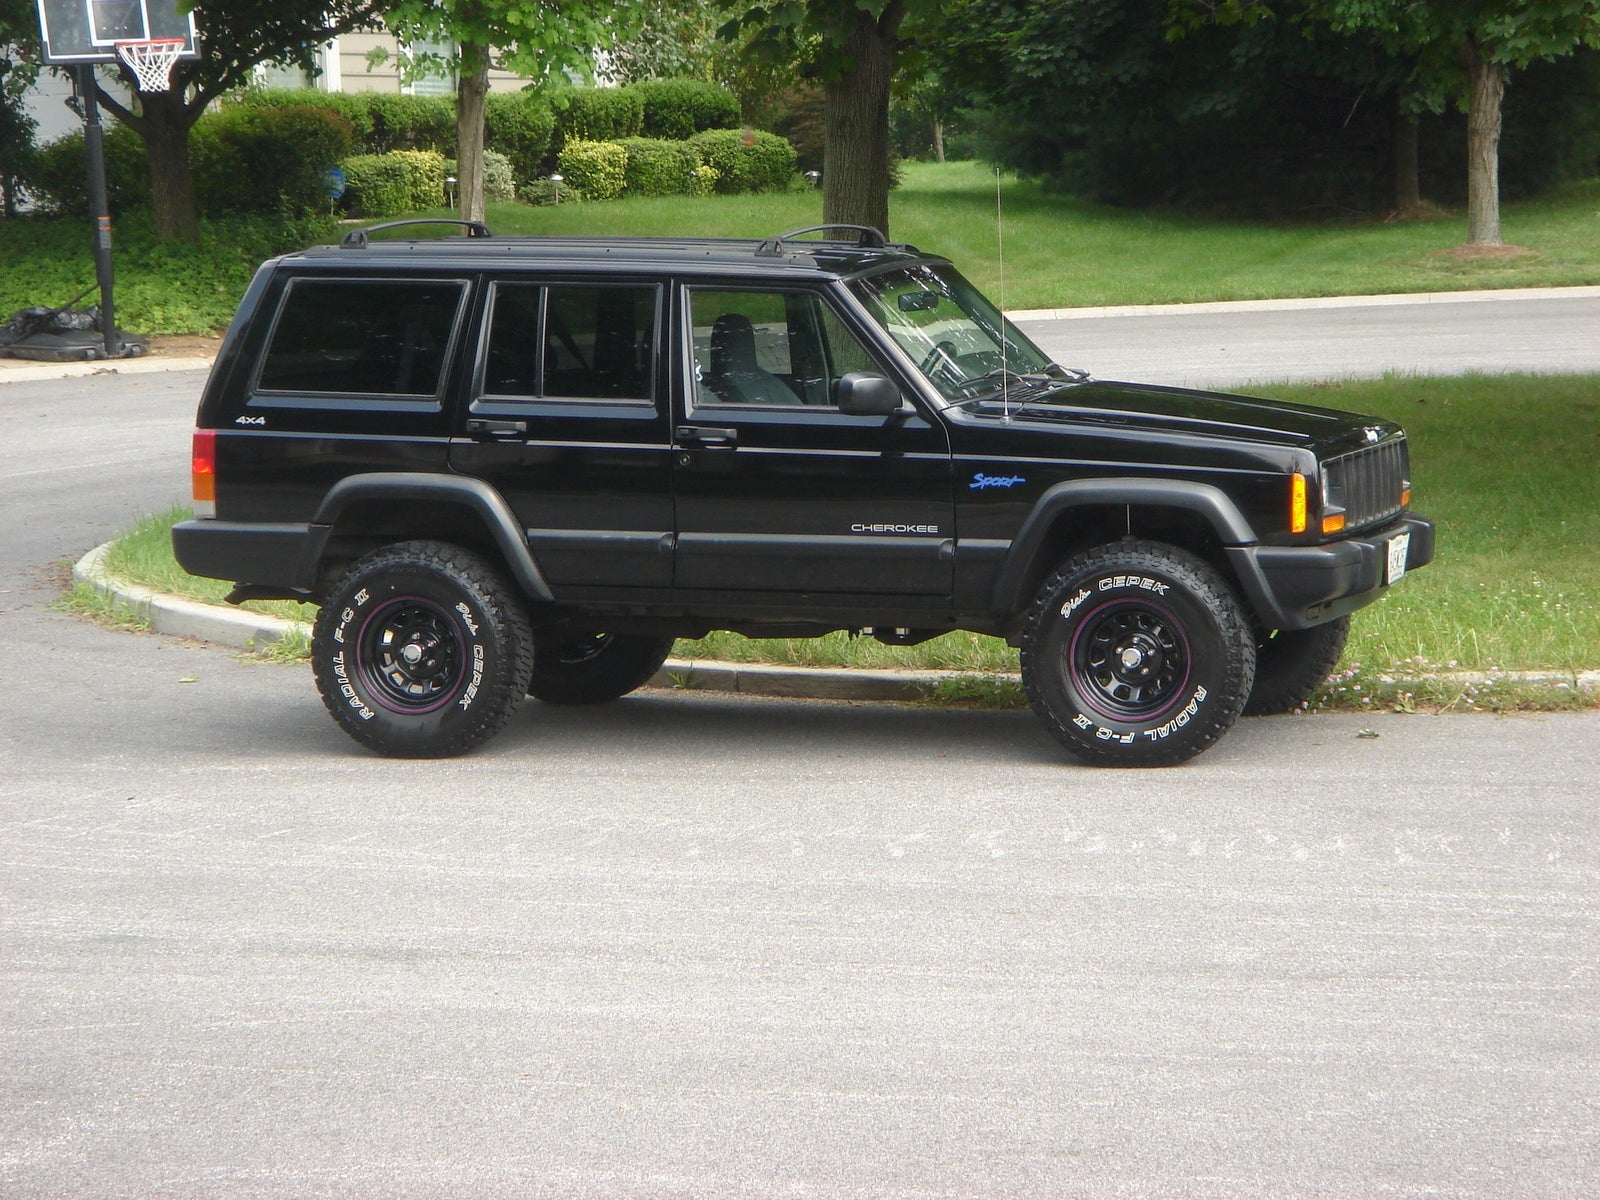 1997 Jeep cherokee sport review